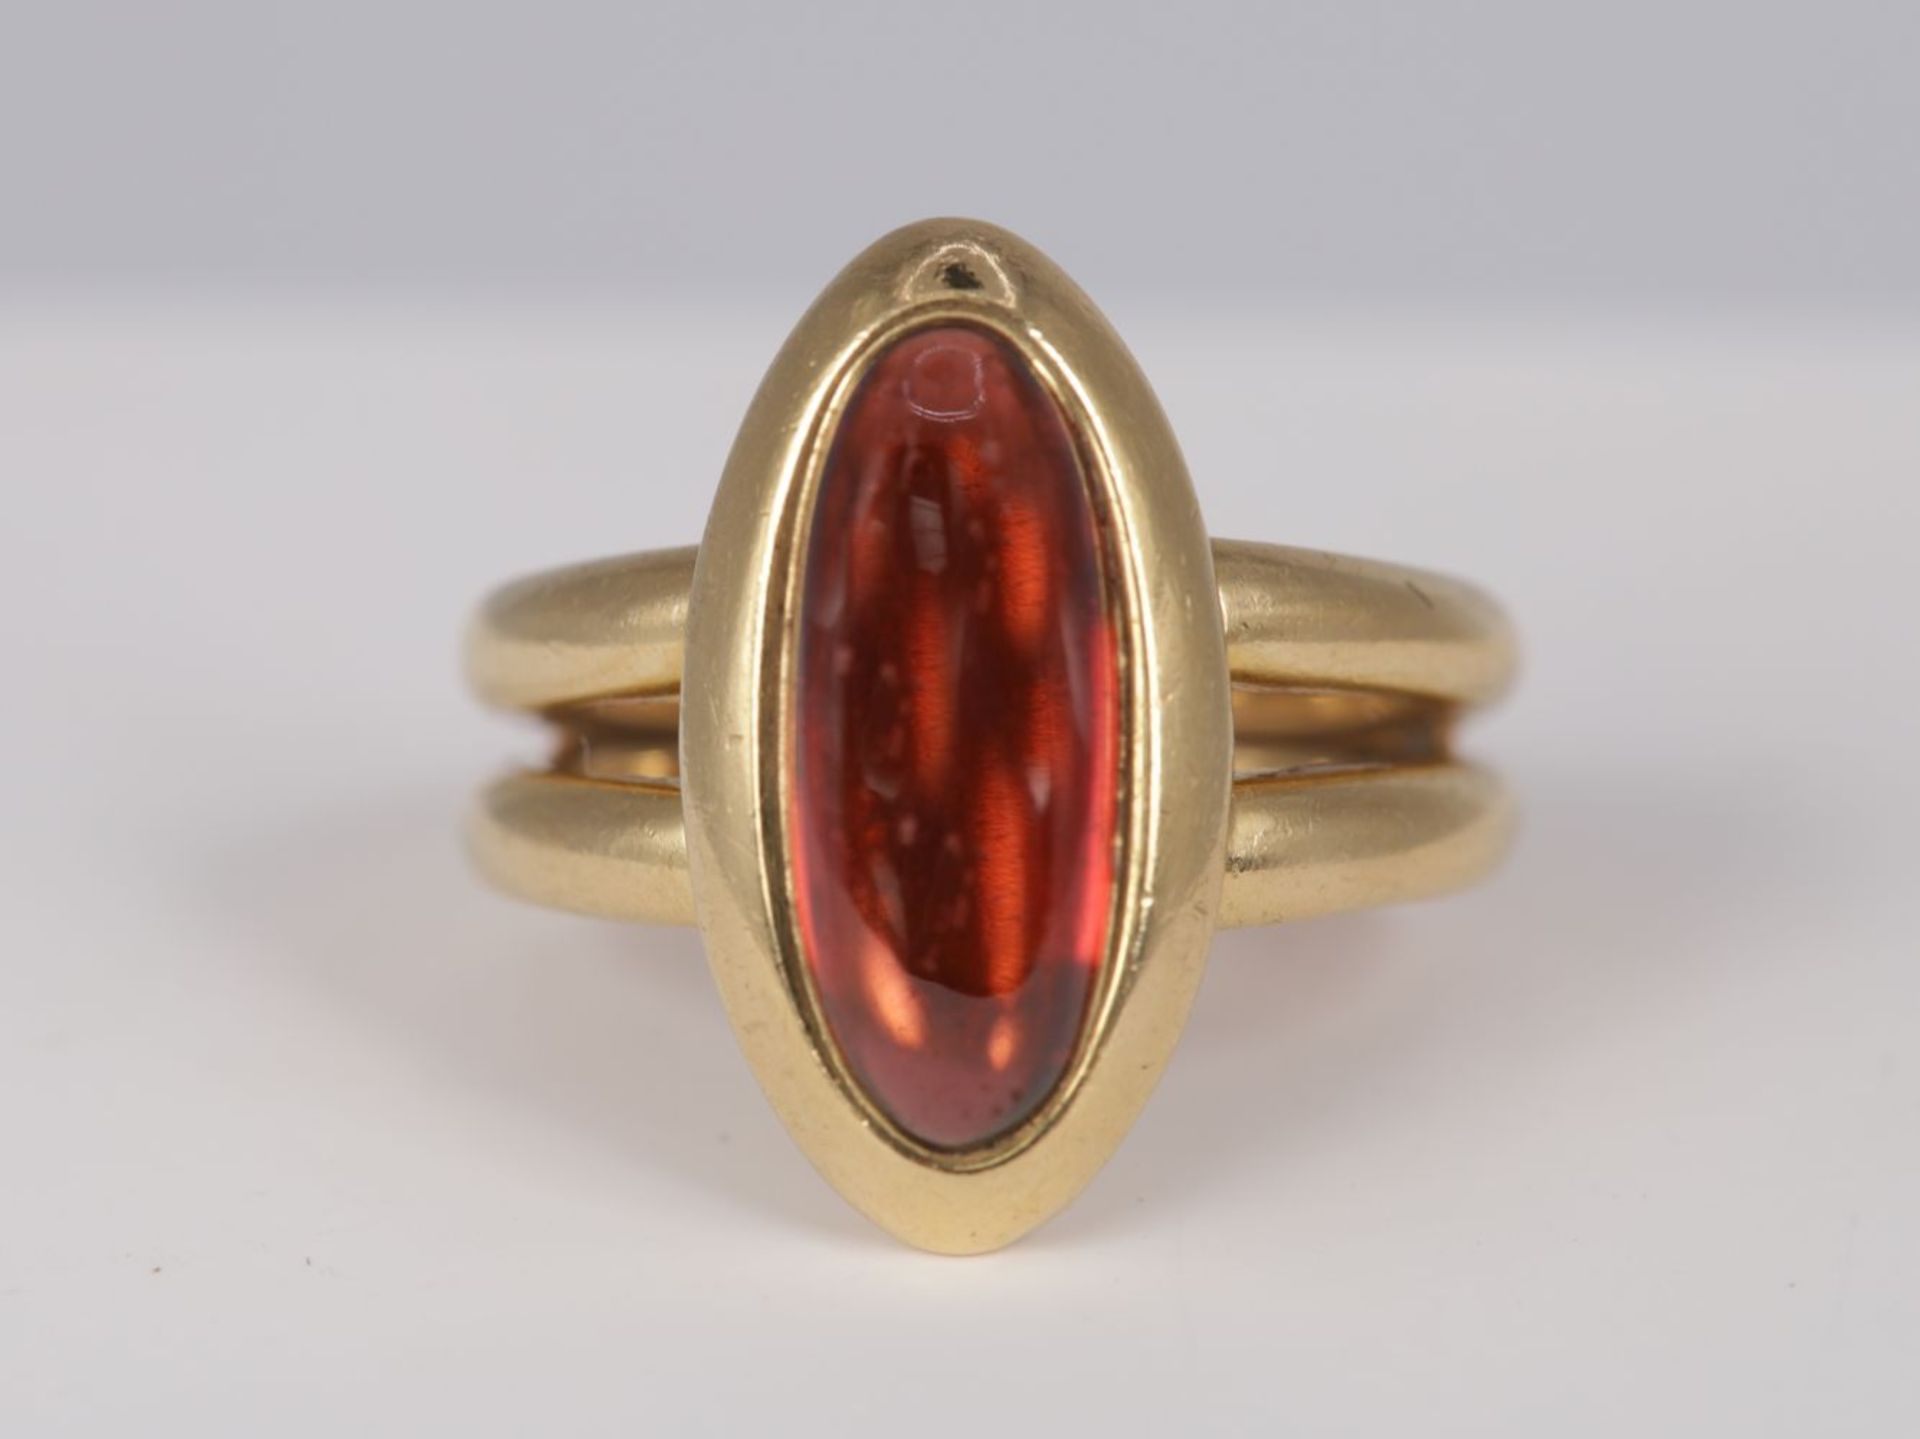 18K YELLOW GOLD MODERNIST RING - Image 2 of 4